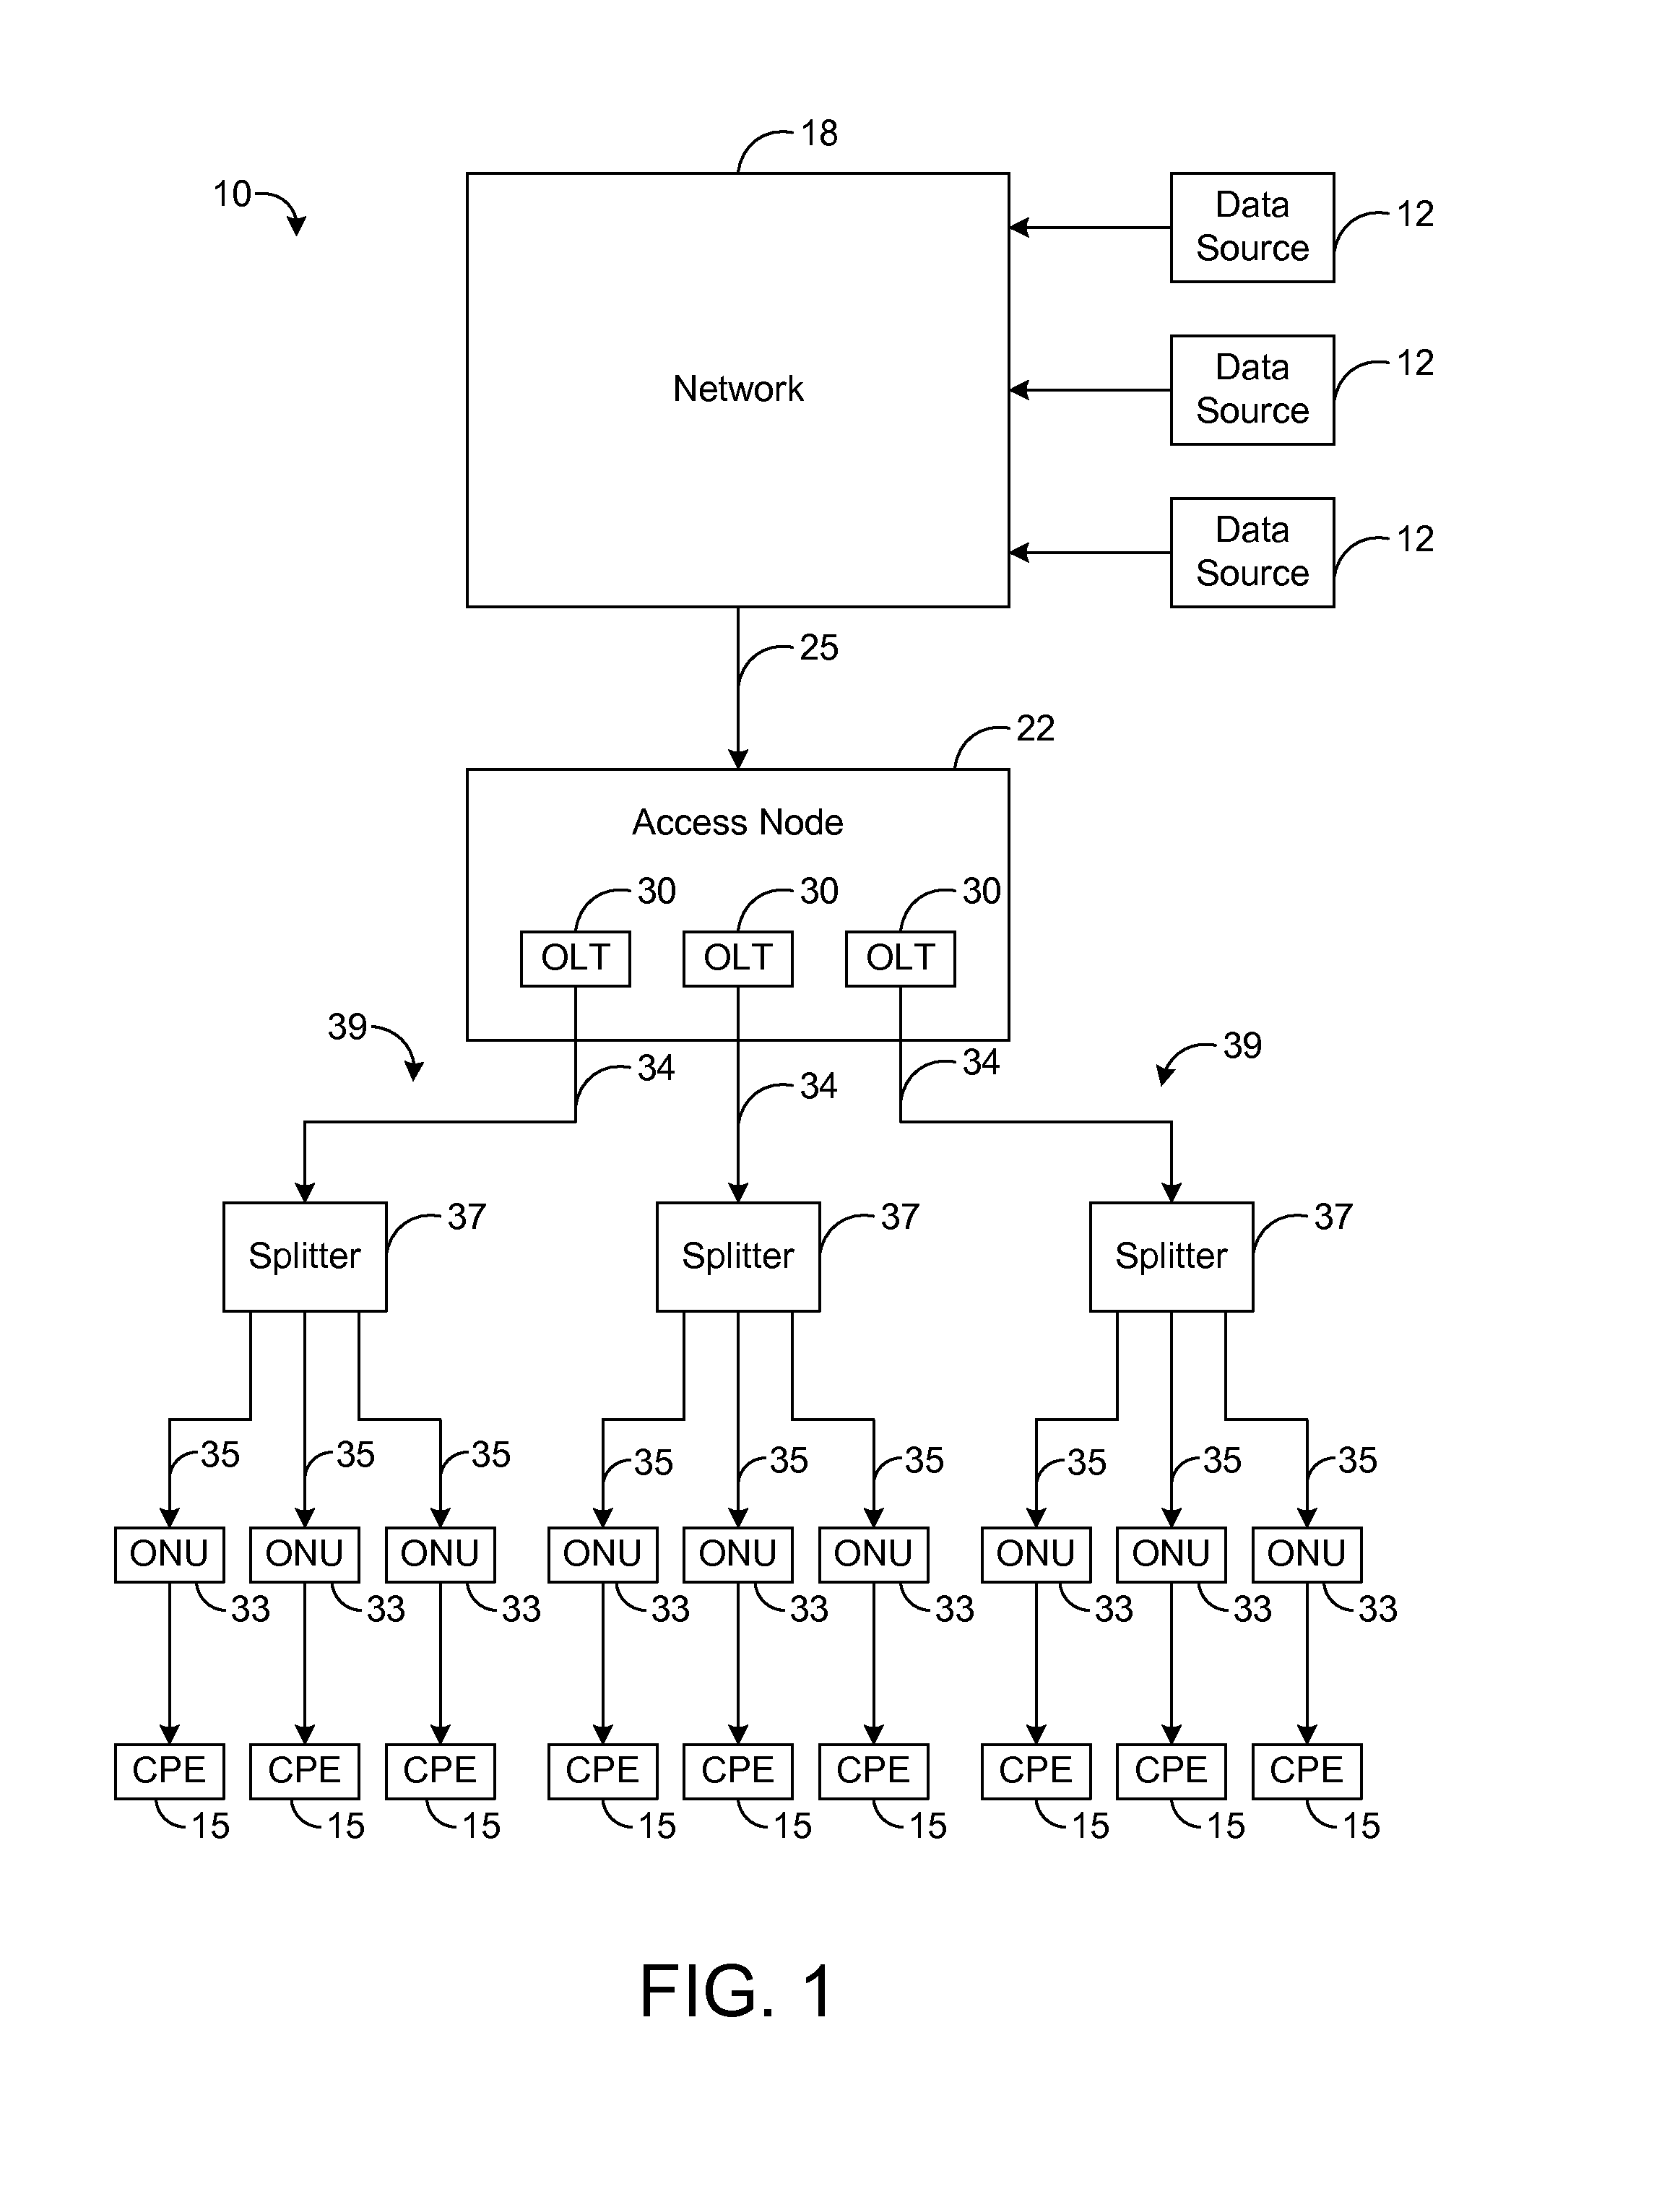 Systems and methods for allocating network bandwidth across access modules